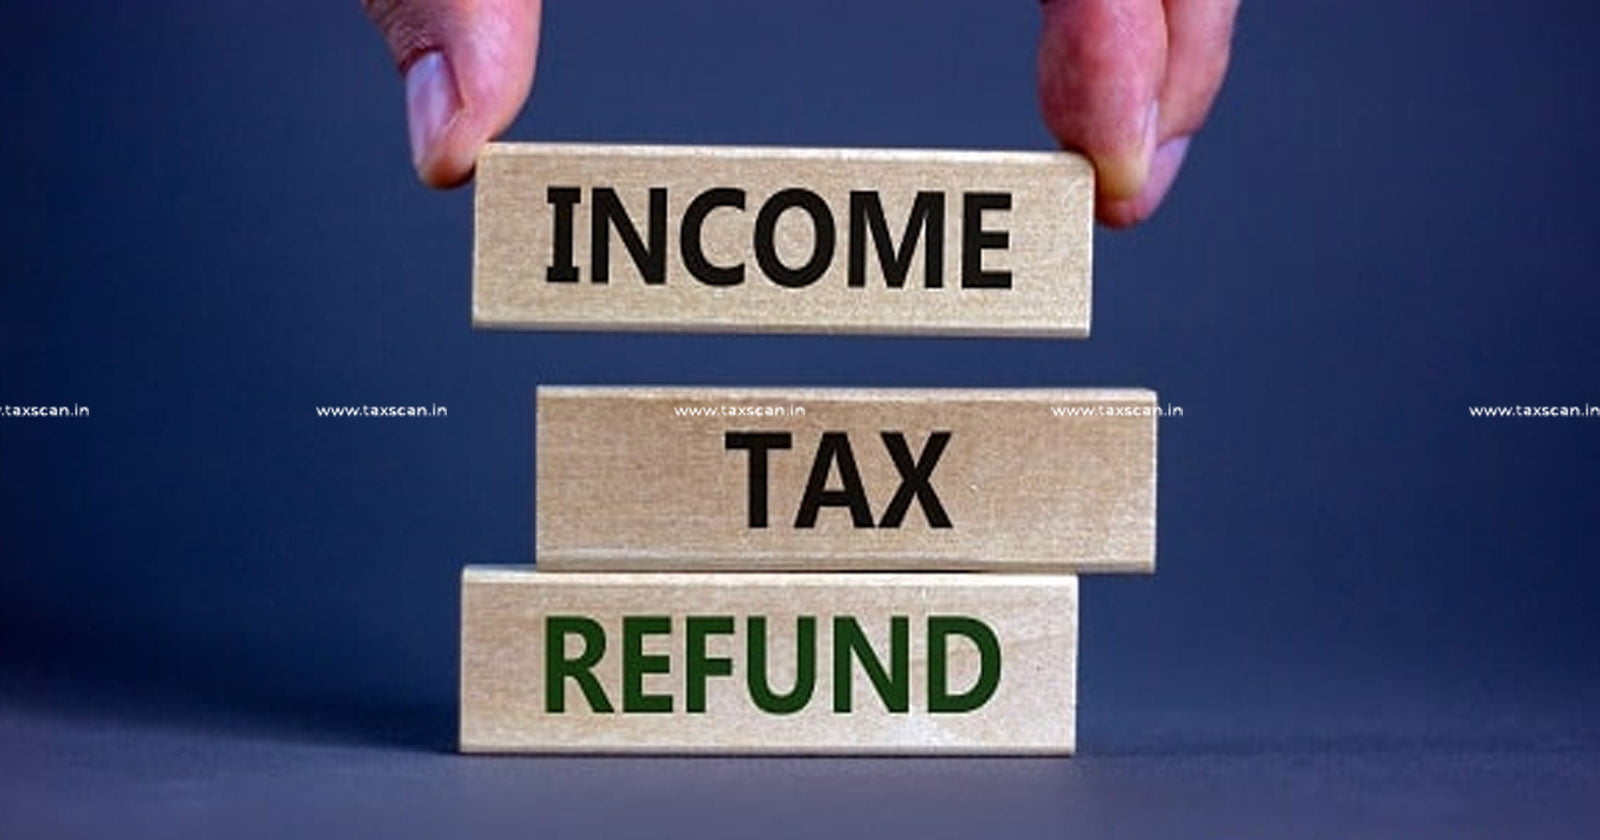 ITR Refund Update - CBDT - Urges - Taxpayers - Representations - Before Adjusting - Refund - against Existing Demand - taxscan